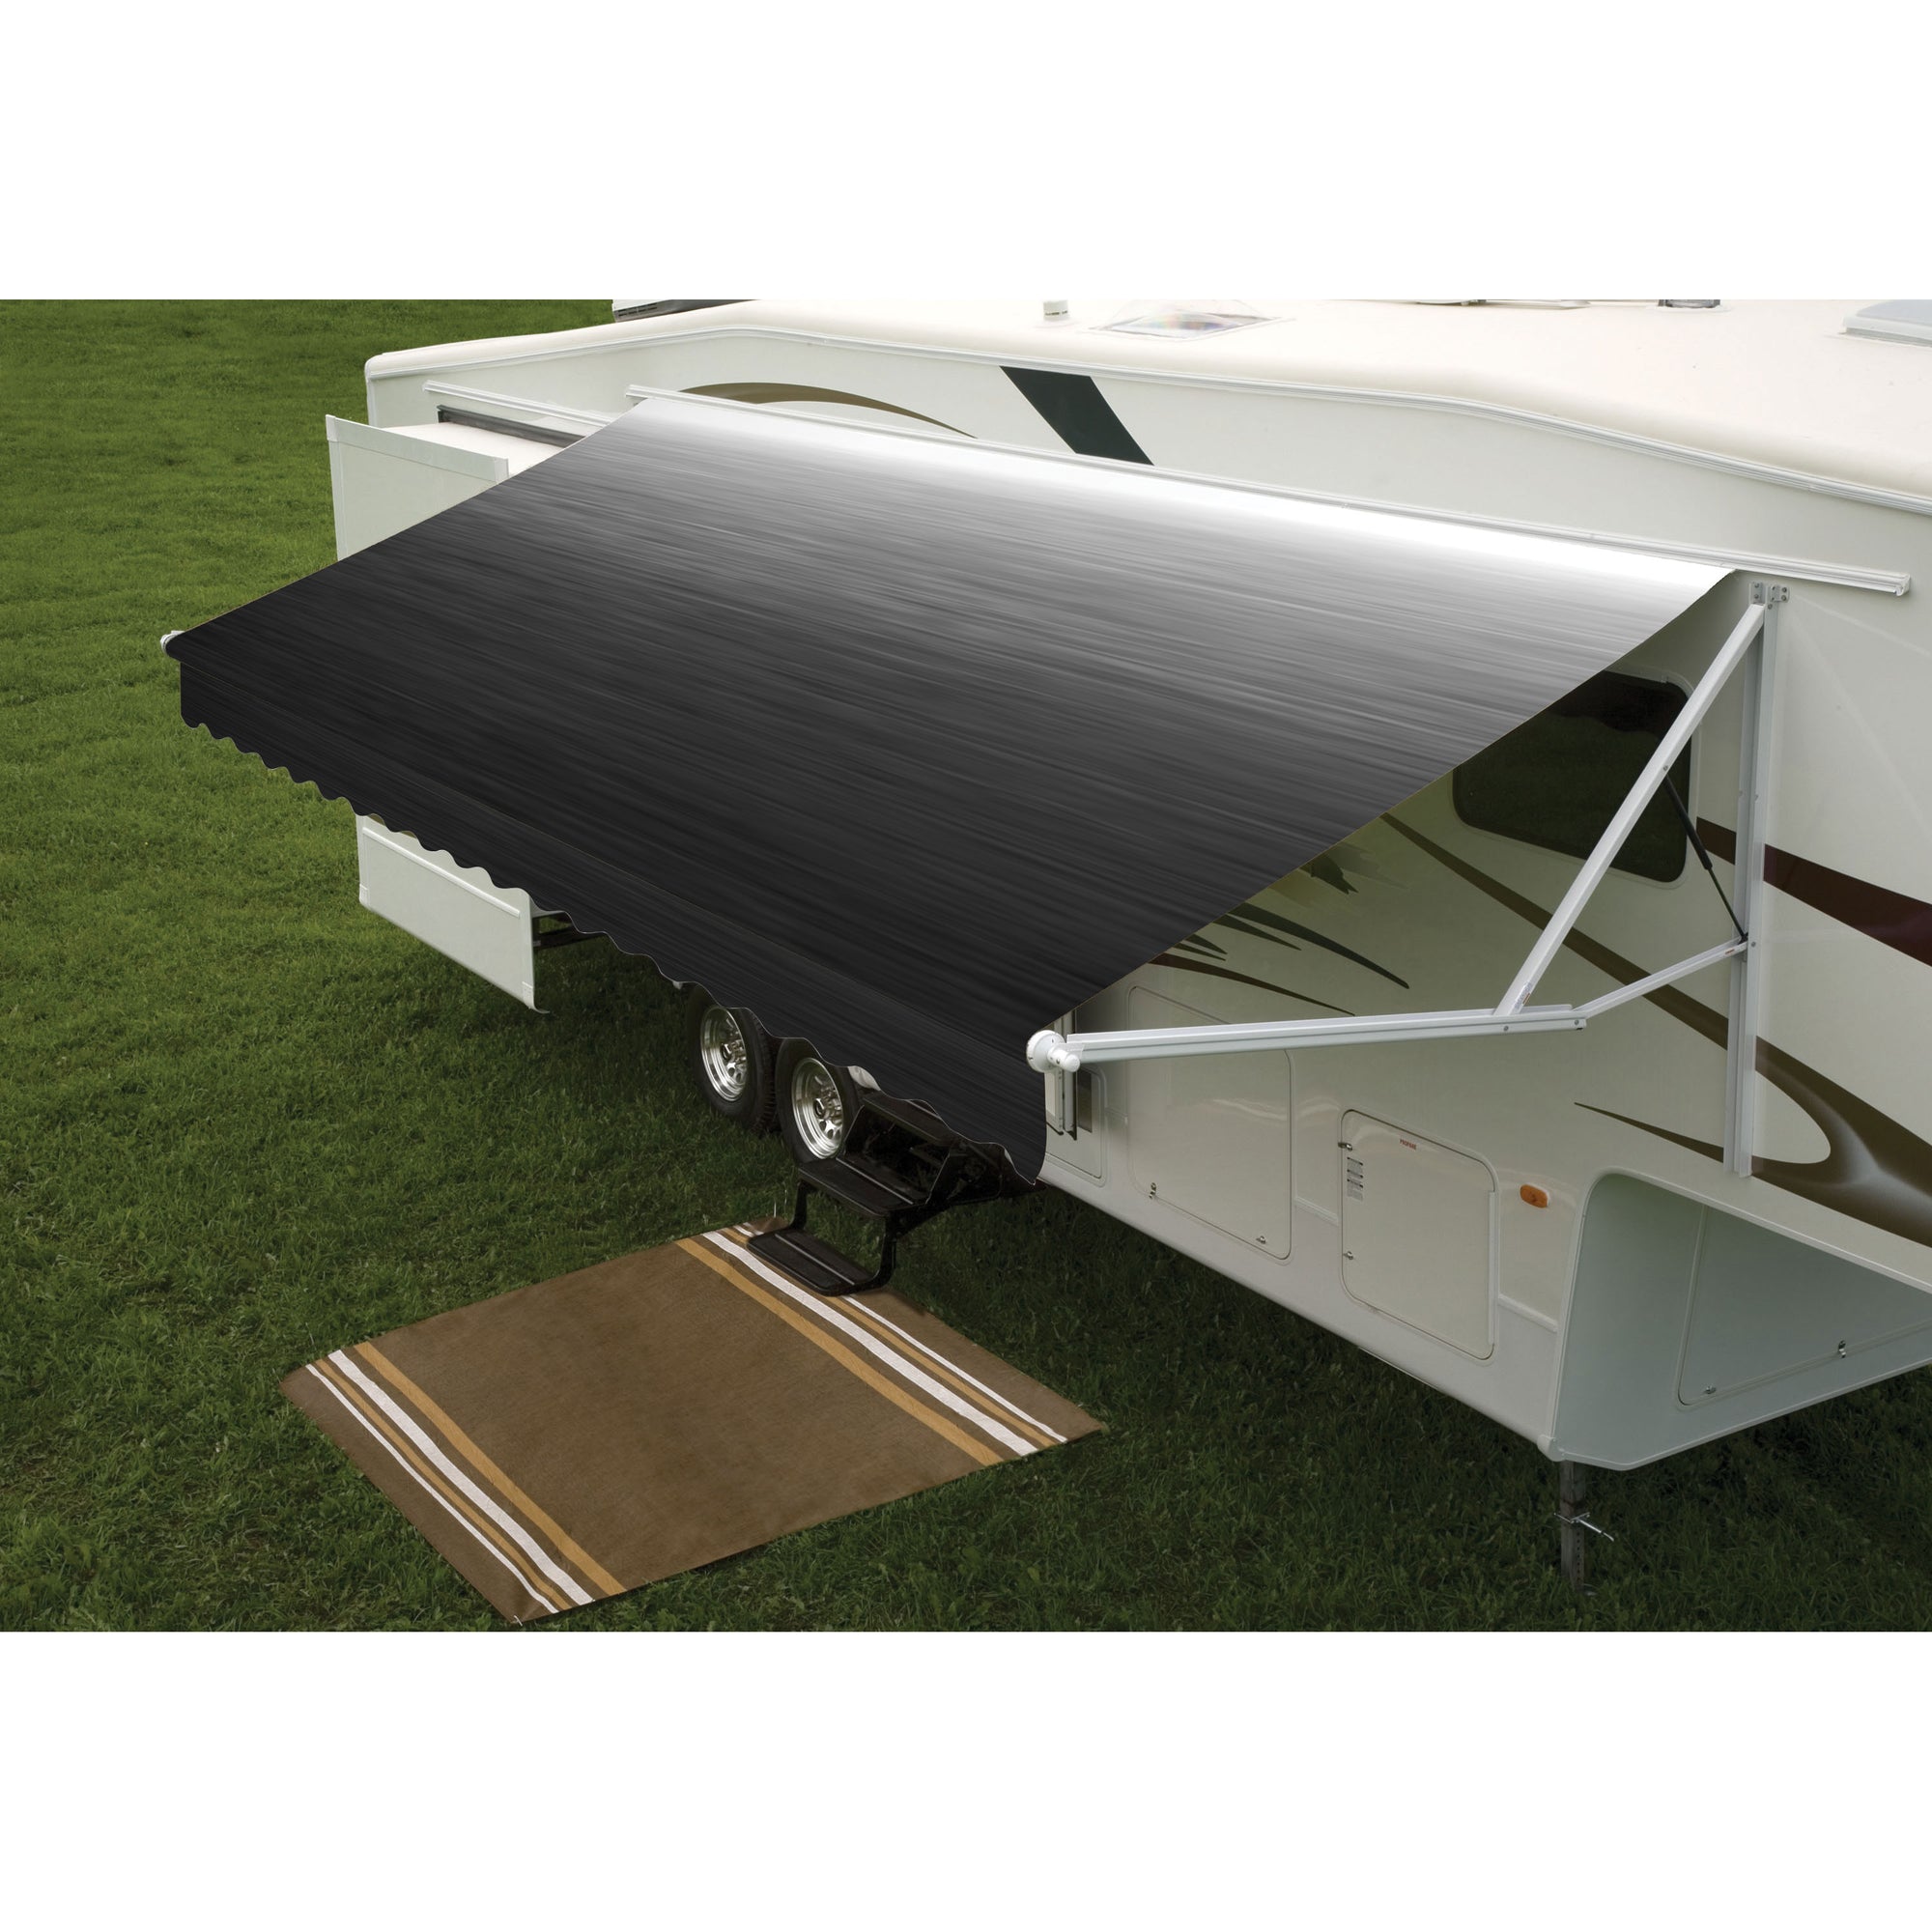 Dometic 915NR21.000B 9100 Power Patio Awning with Polar White Weathershield - 21', Onyx Linen Fade